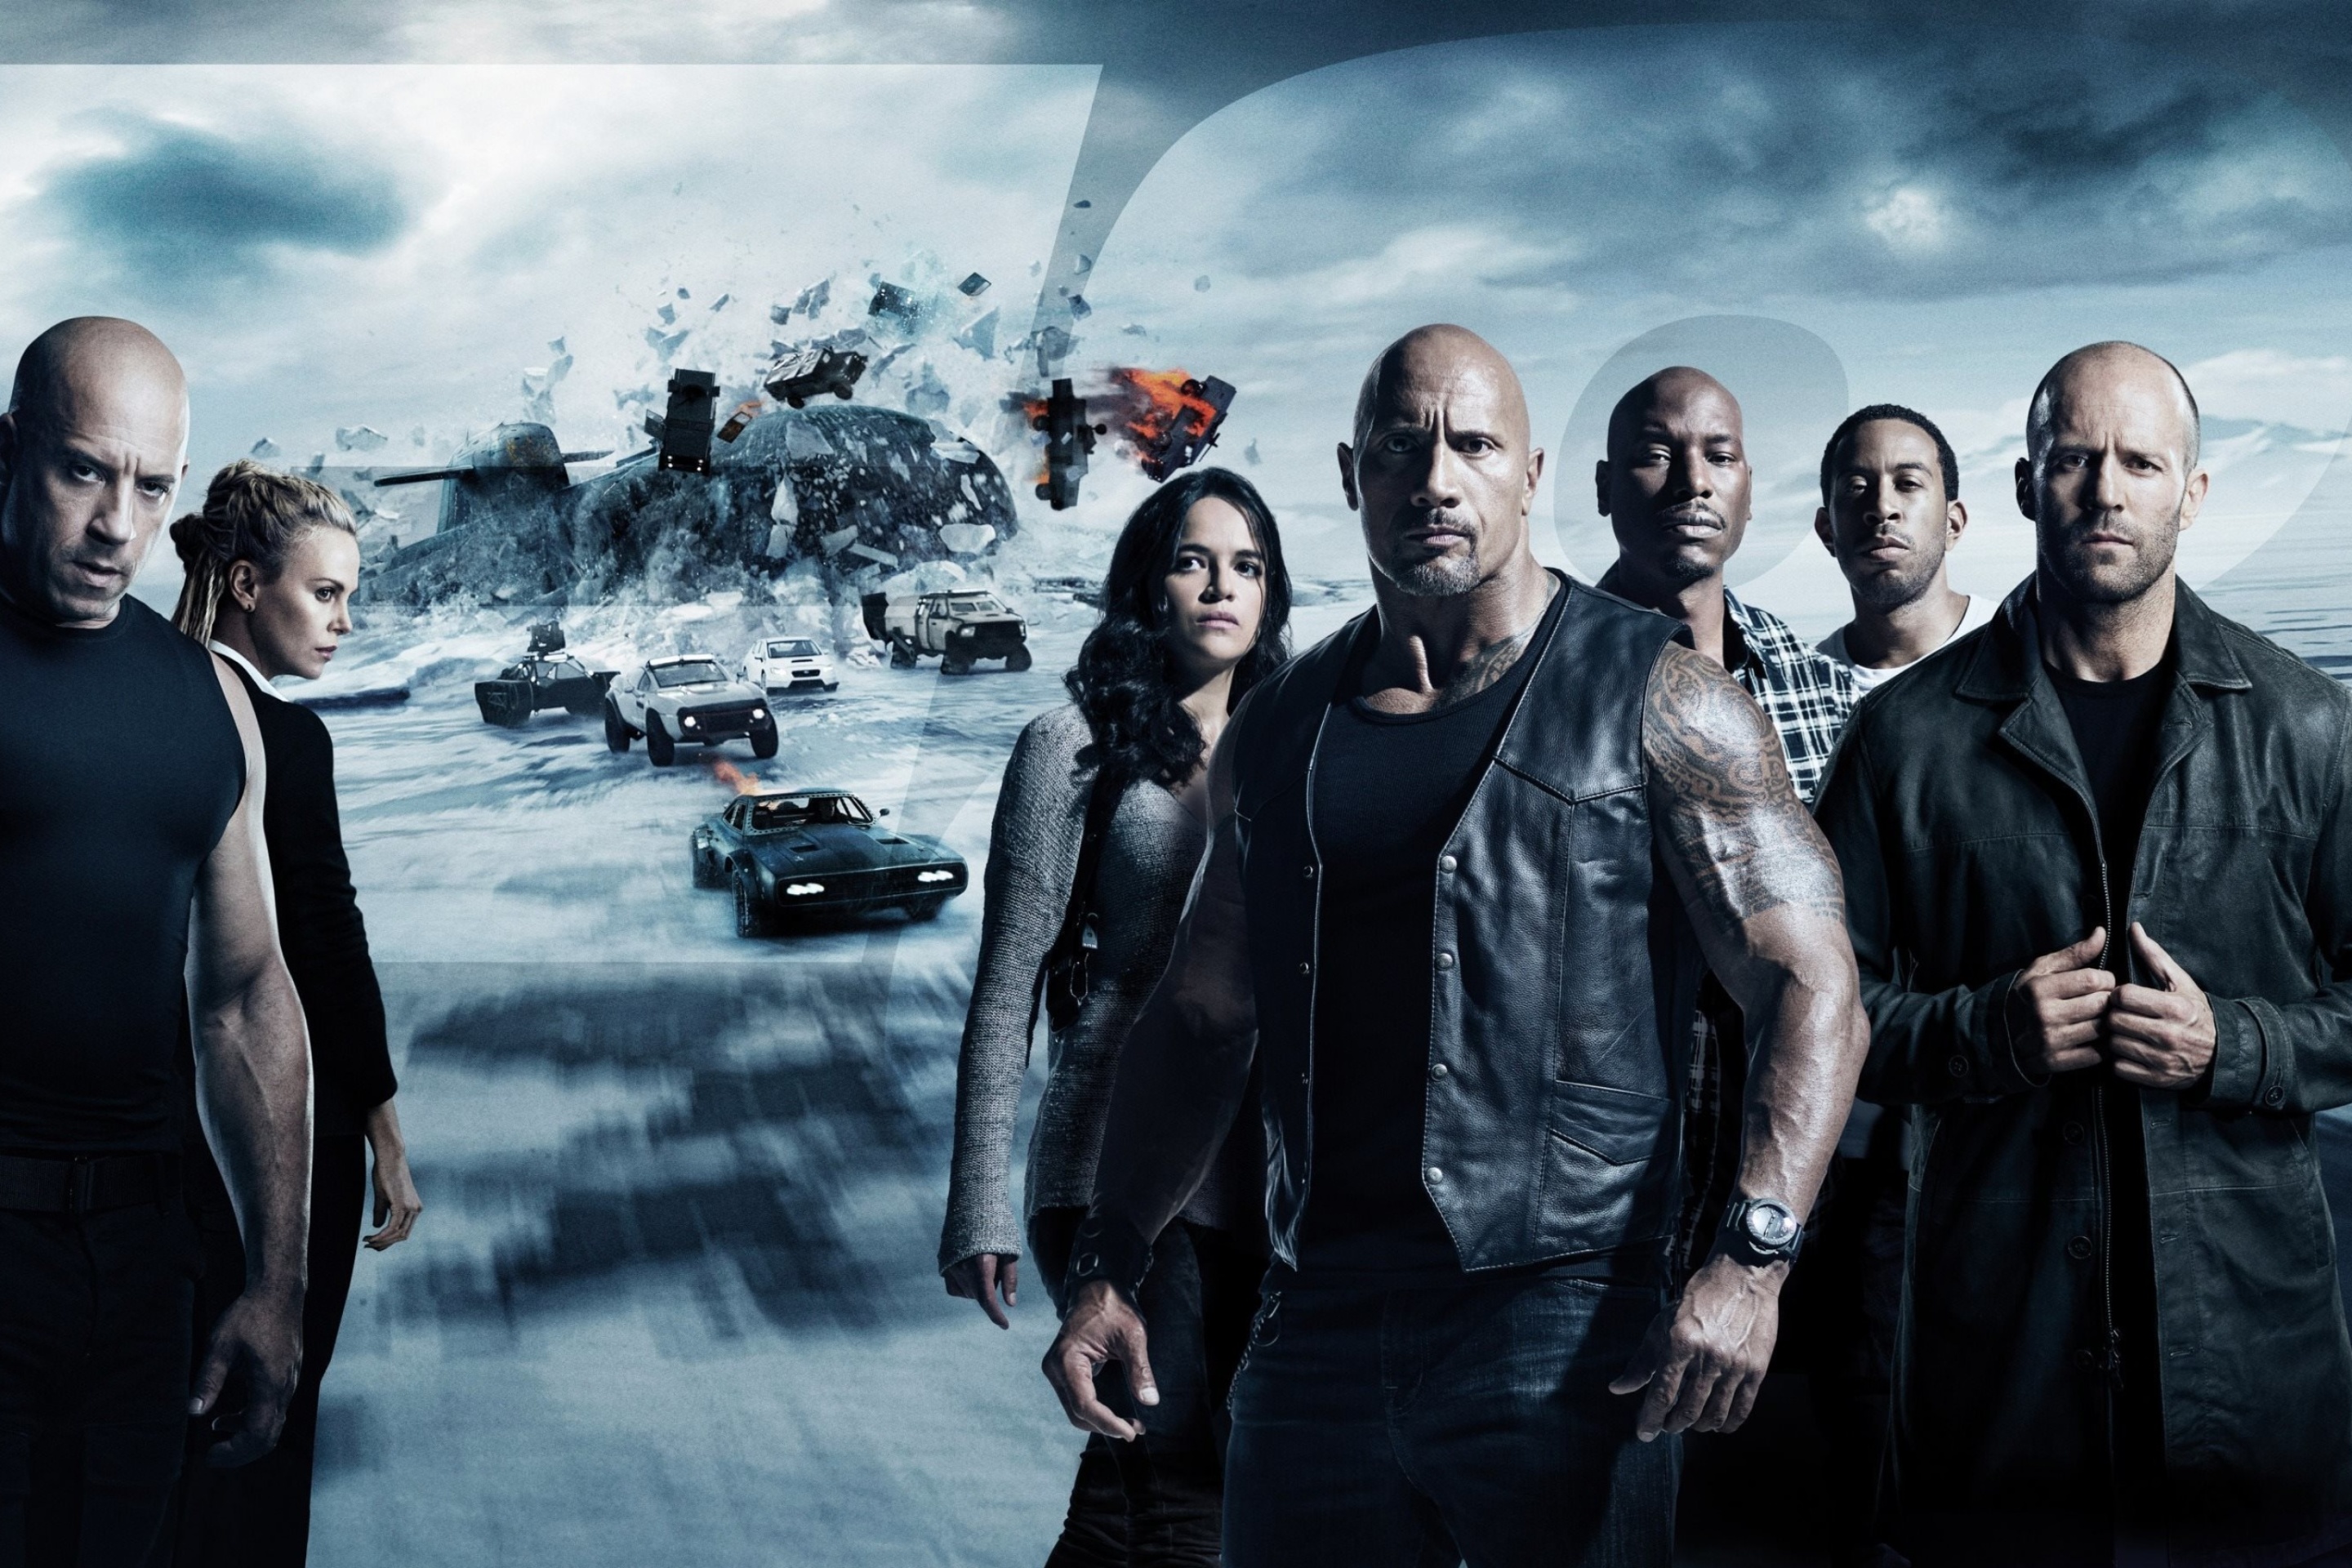 The Fate of the Furious with Vin Diesel, Dwayne Johnson, Charlize Theron wallpaper 2880x1920